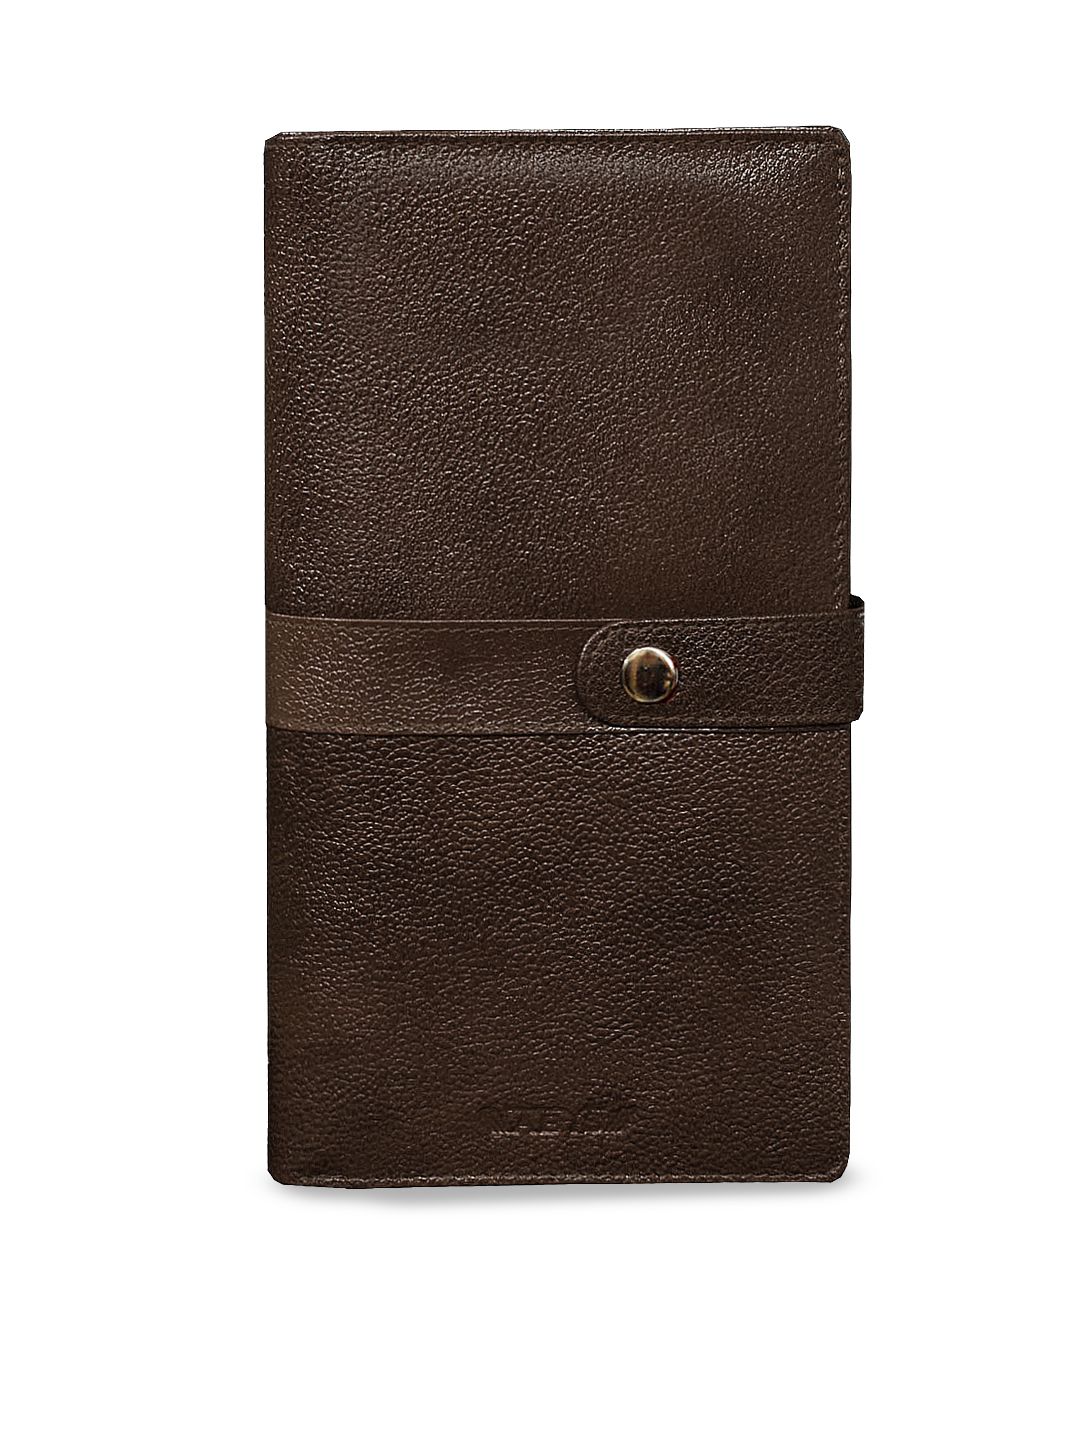 ABYS Unisex Coffee Brown Leather Passport Holder Price in India